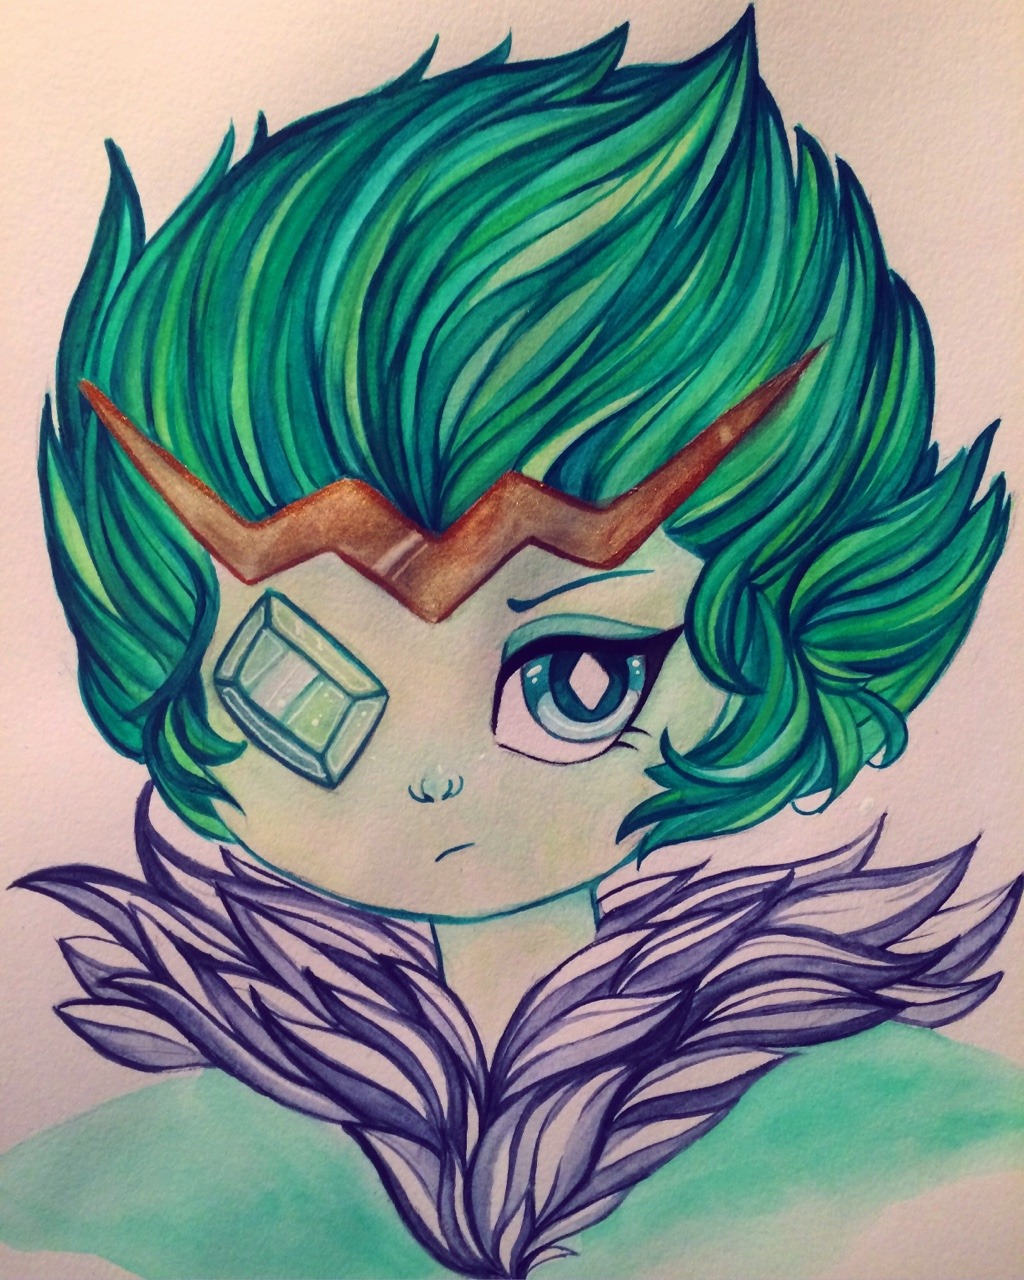 I wanted to draw some Steven universe fan art so I drew emerald